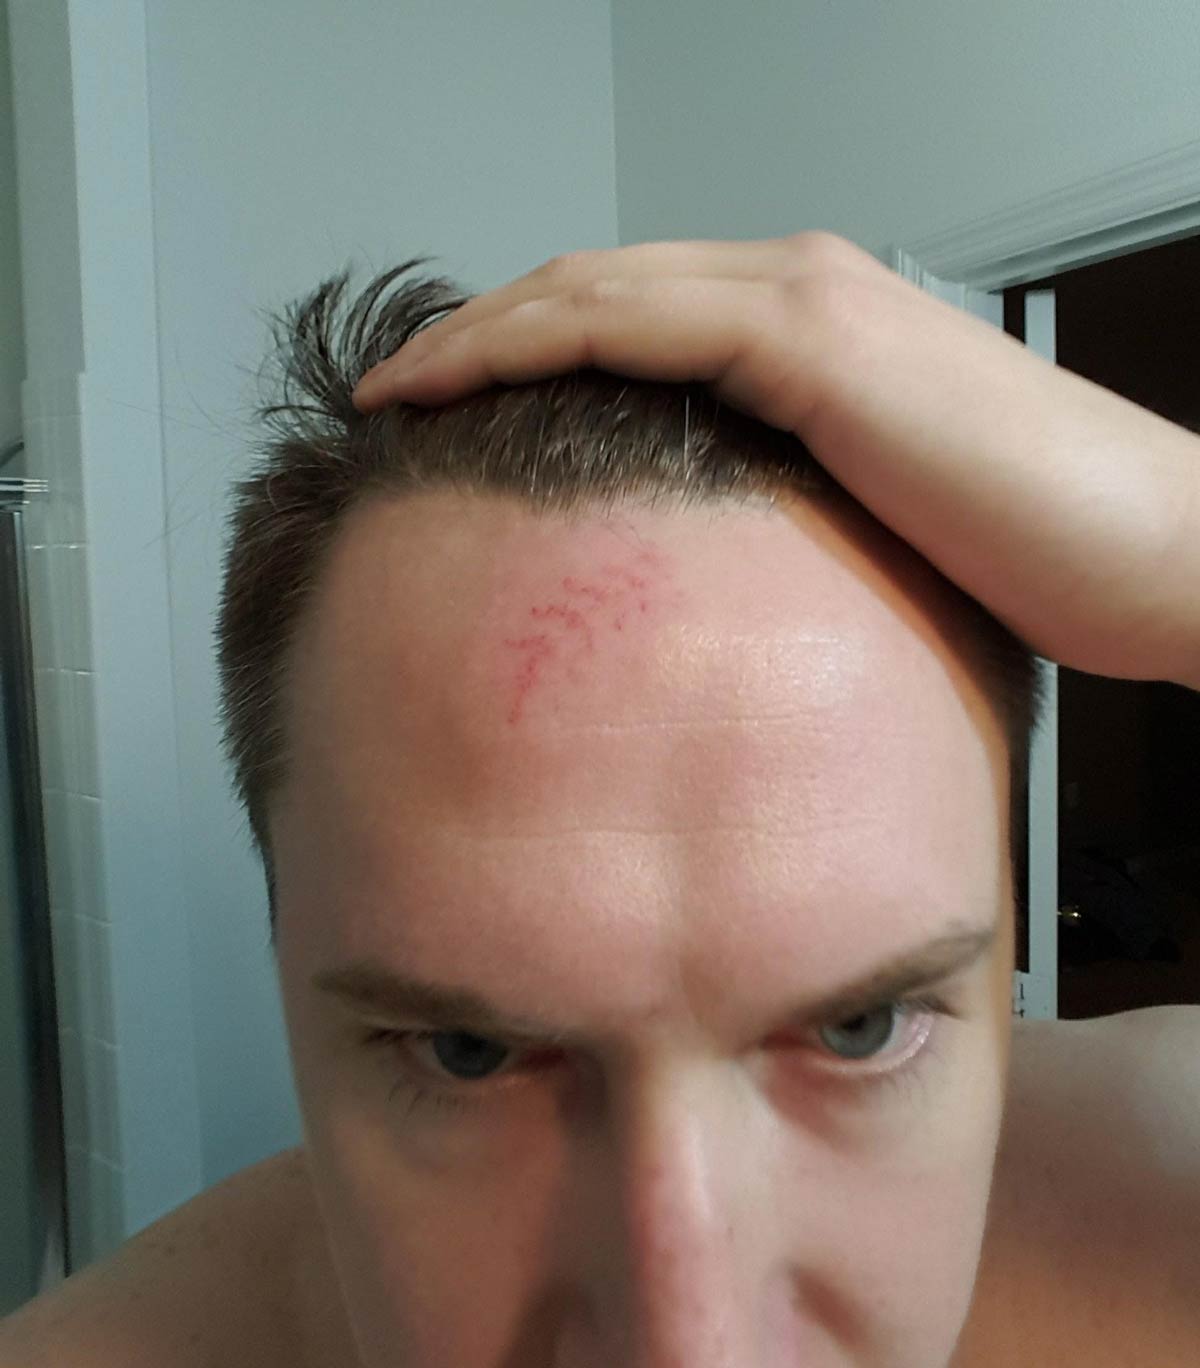 Joined a softball league, first game ever got hit in the forehead by the ball